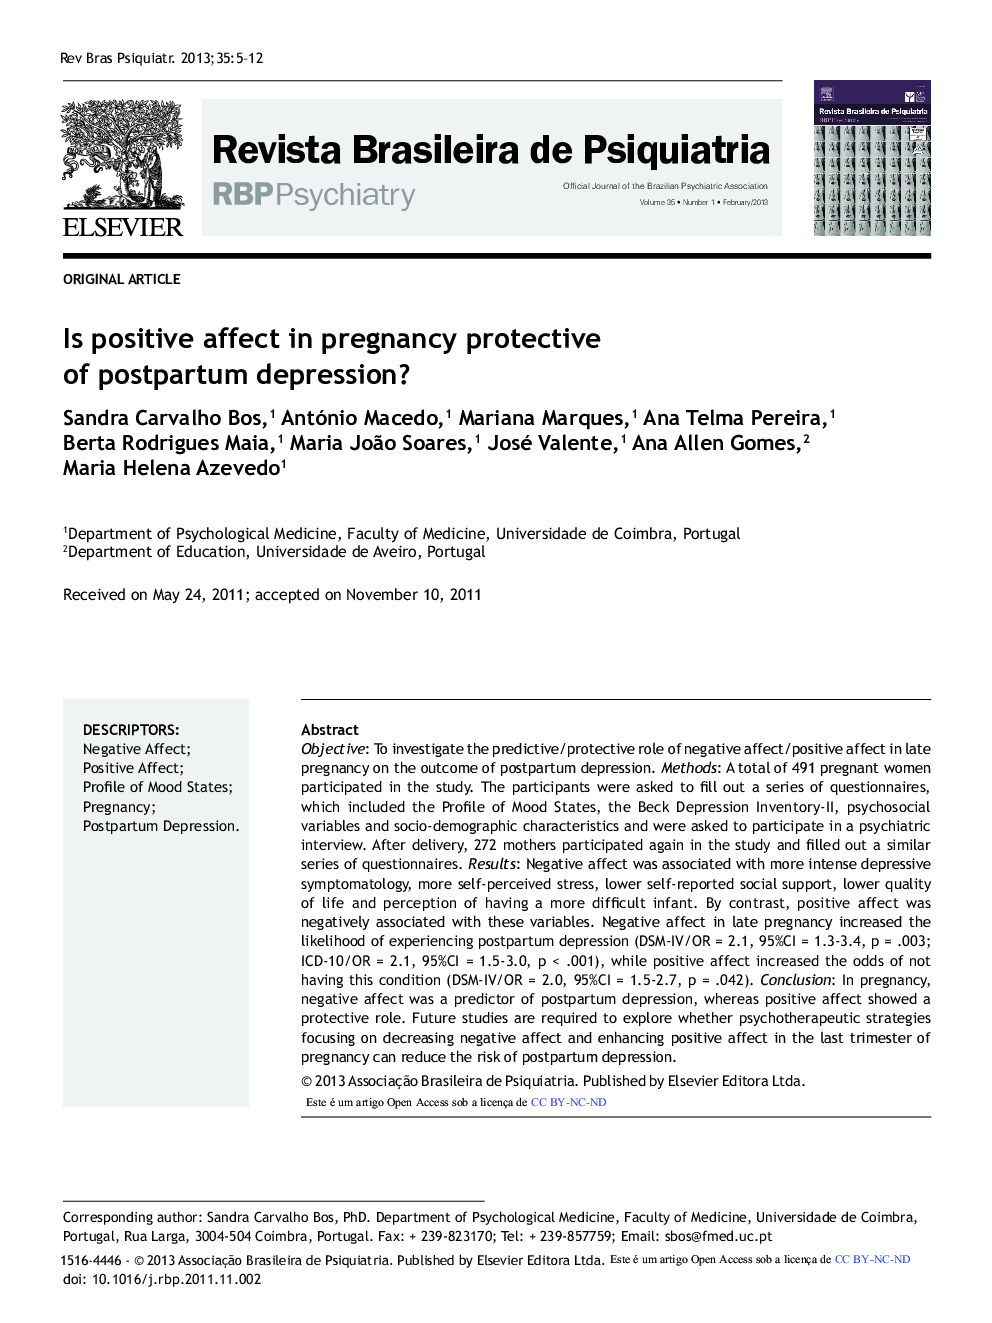 Is Positive Affect in Pregnancy Protective of Postpartum Depression?